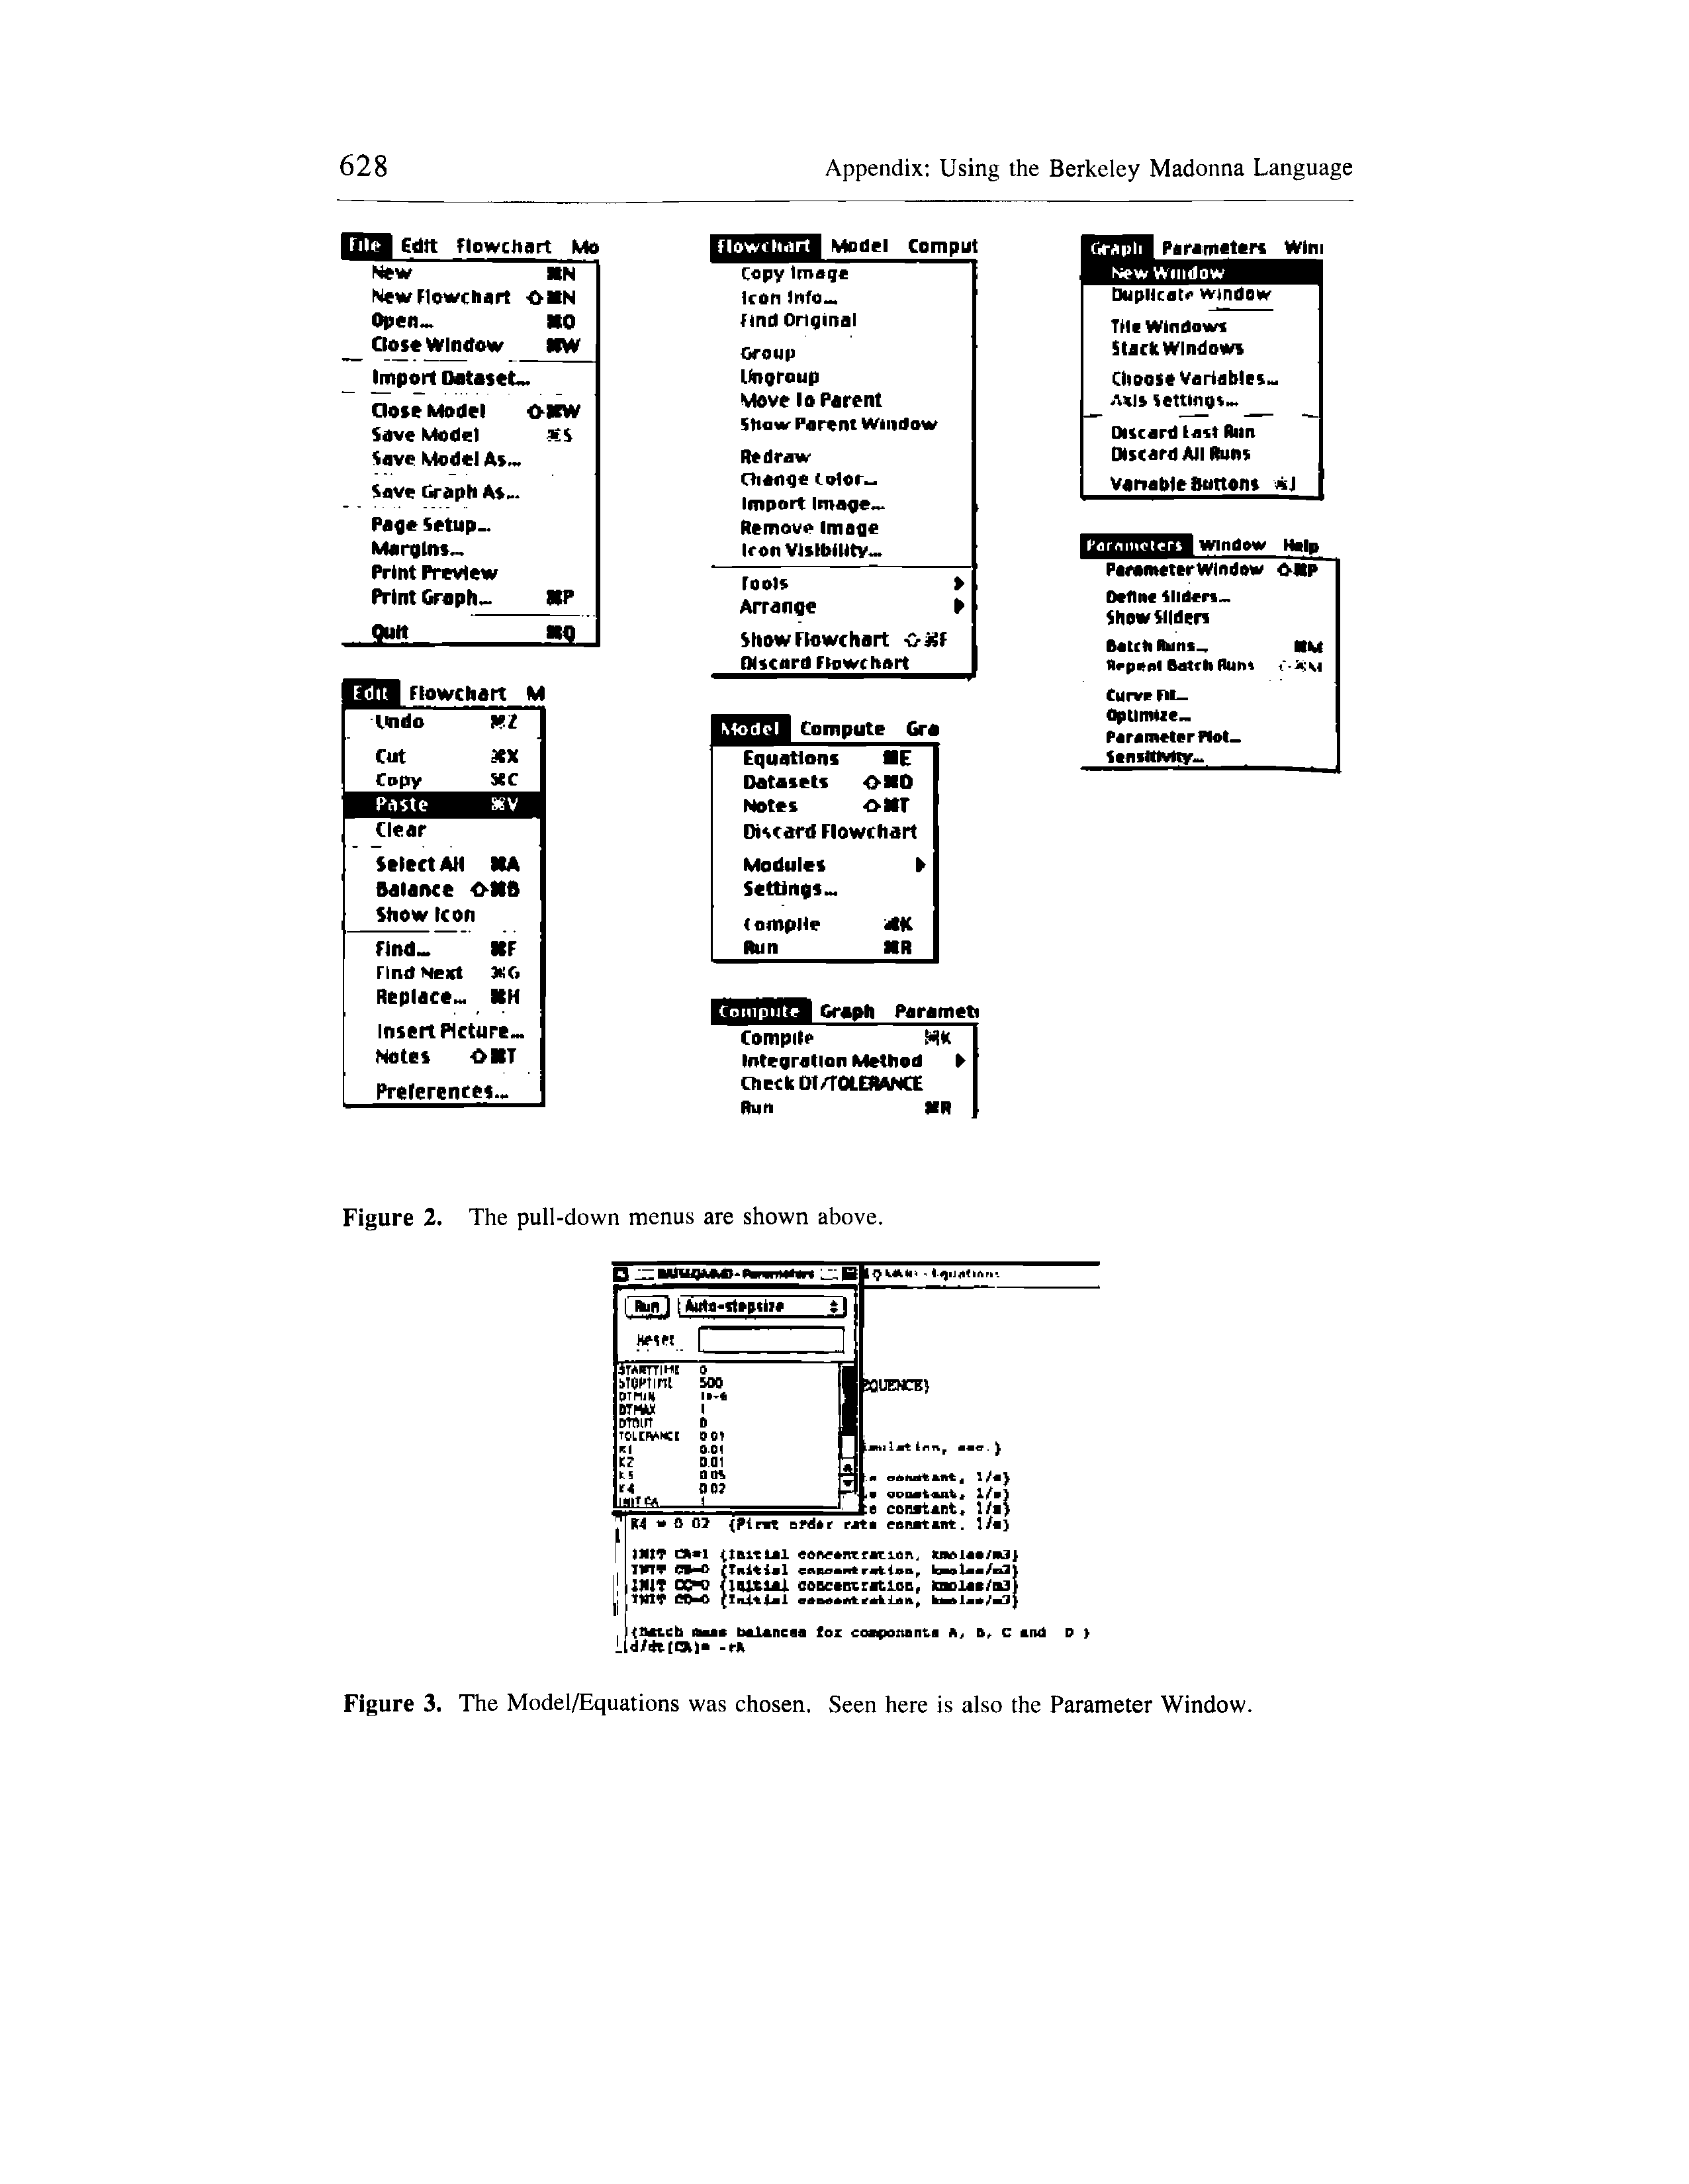 Figure 2. The pull-down menus are shown above.